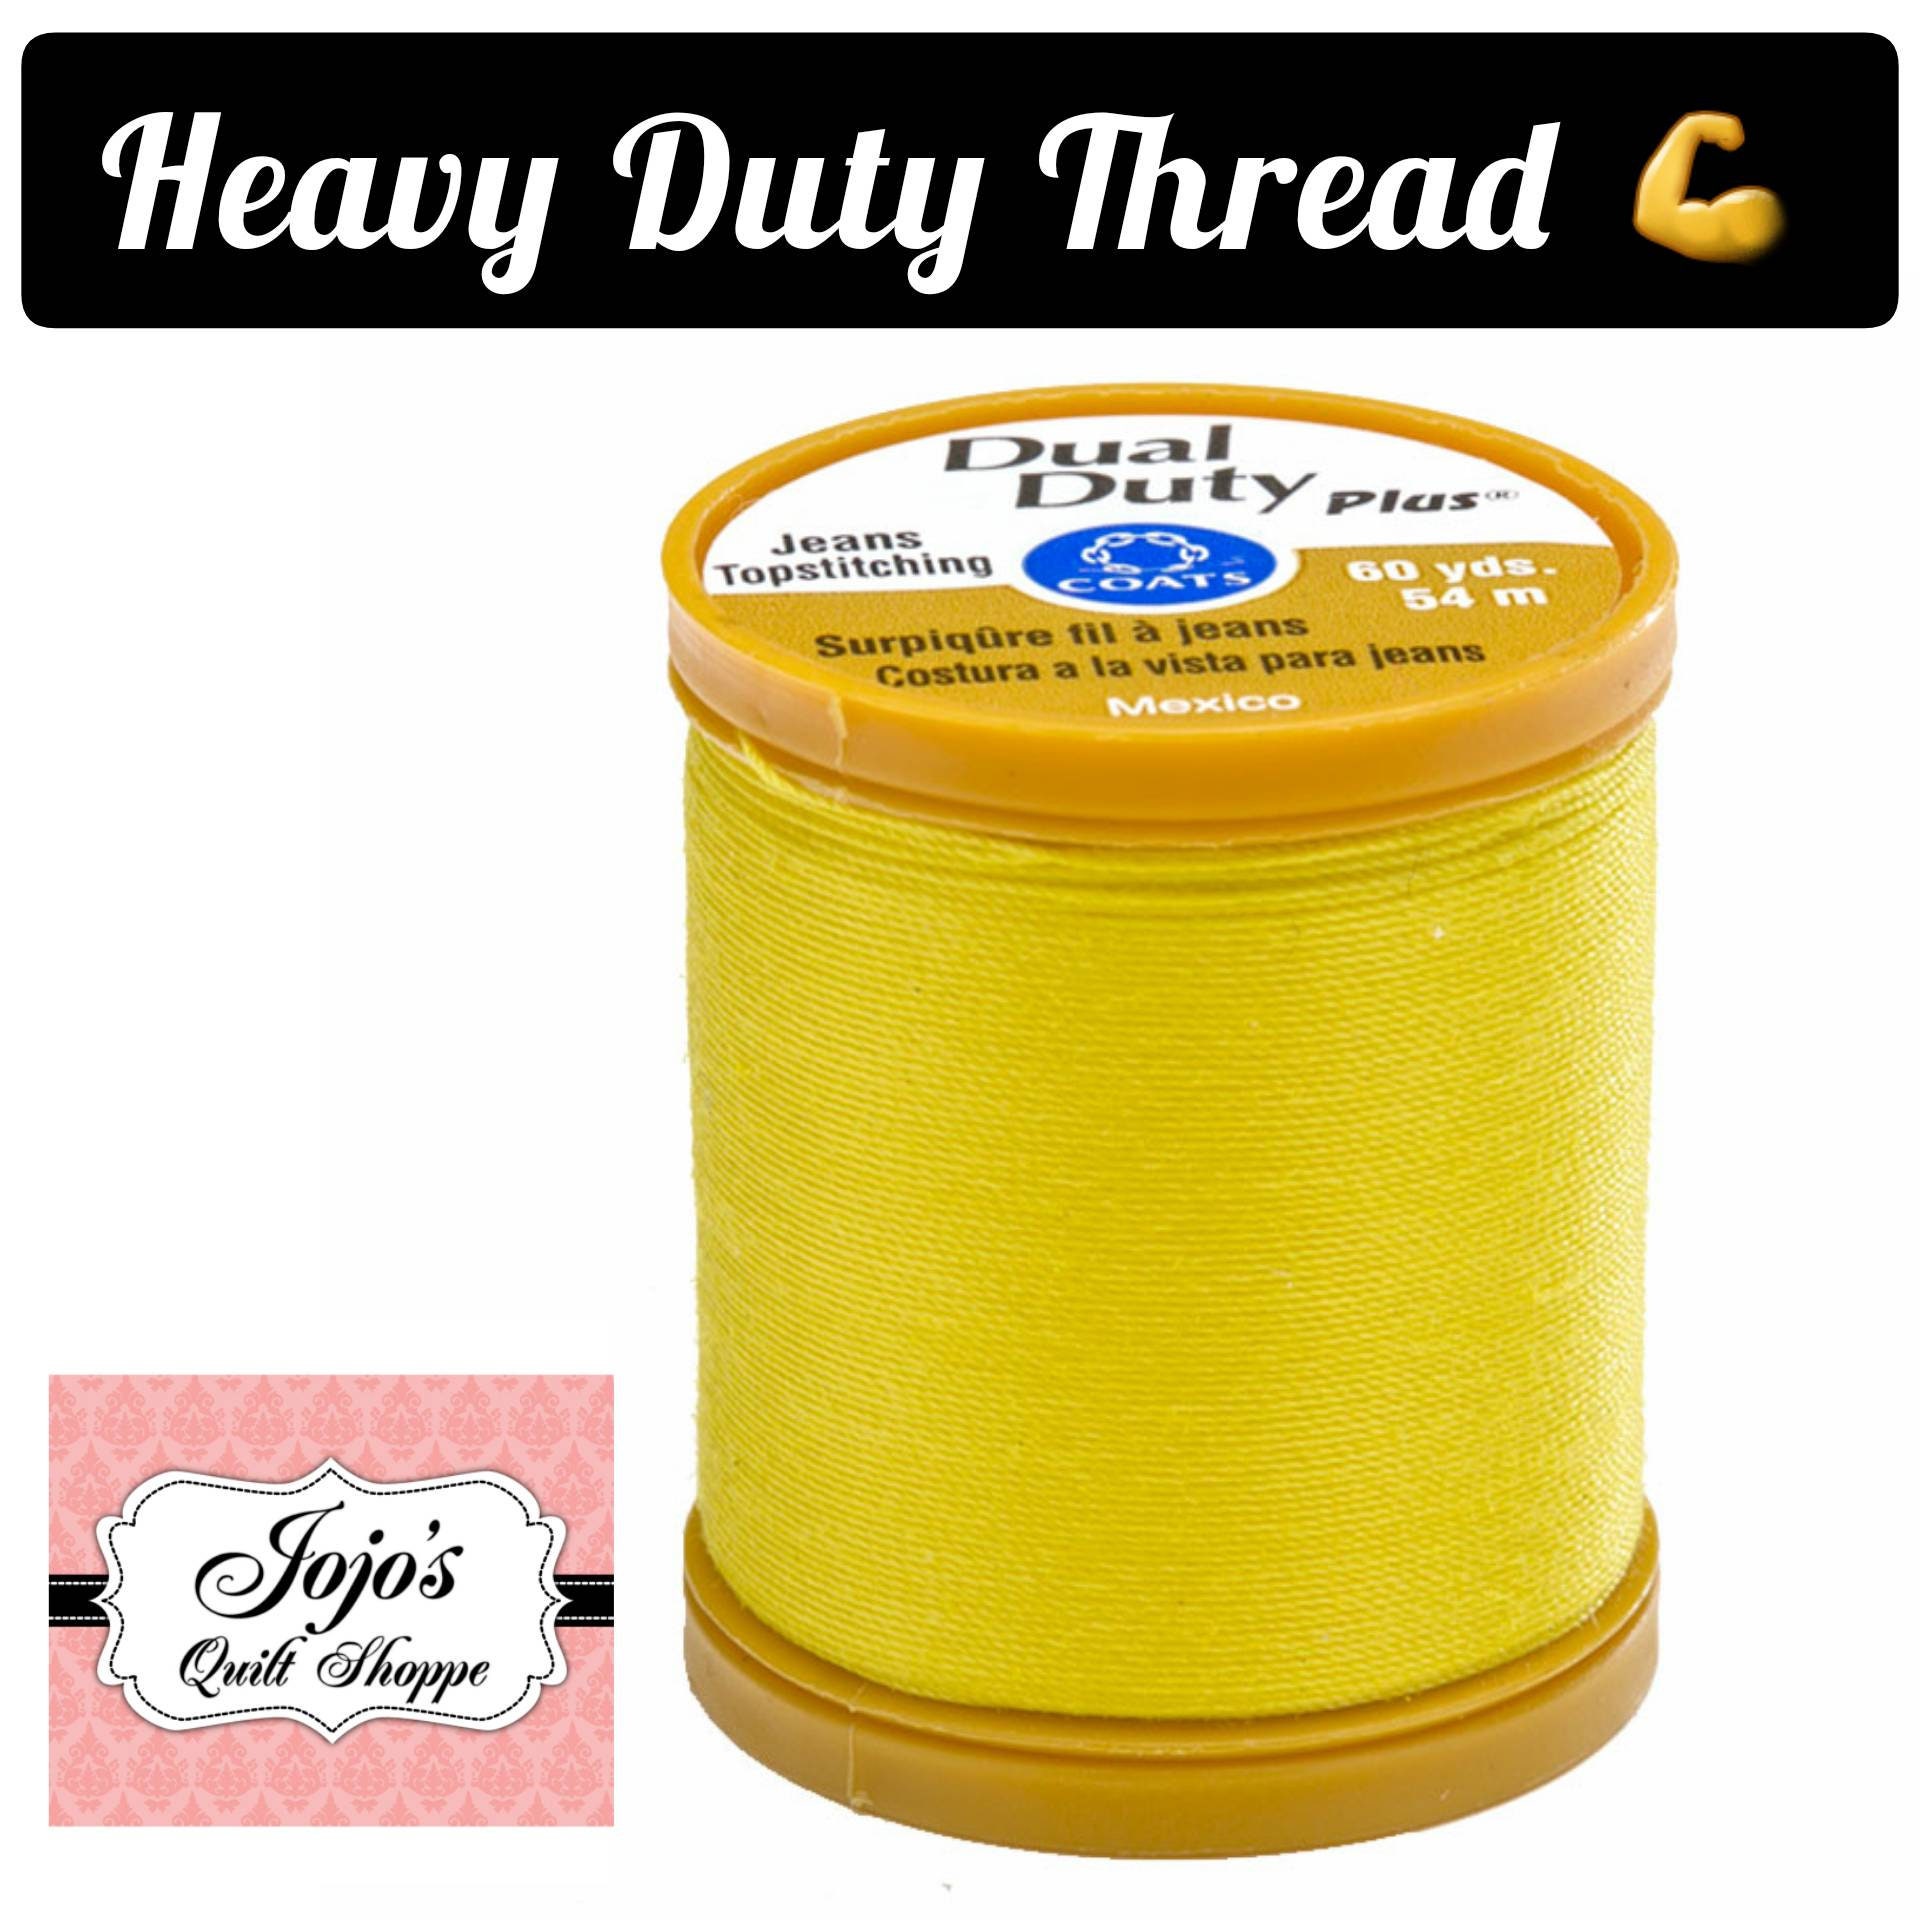 Coats and Clark Sewing Thread mimosa yellow XP Heavy/dual Duty Plus Jean &  Topstitchingcotton/polythread 60 Yards, 54 Meters S977 7260 